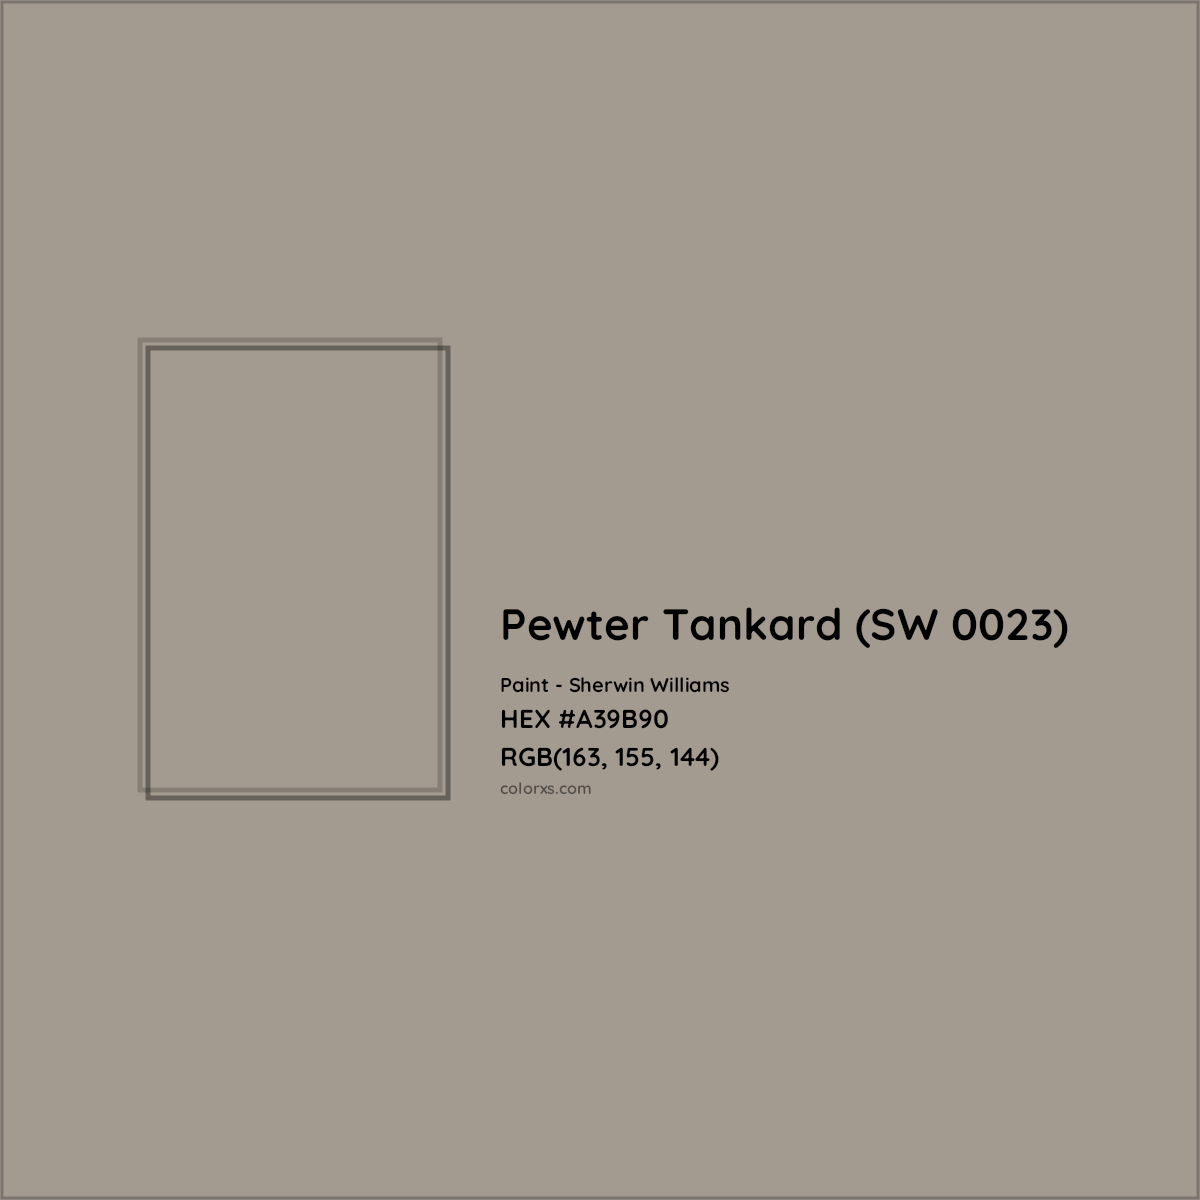 HEX #A39B90 Pewter Tankard (SW 0023) Paint Sherwin Williams - Color Code